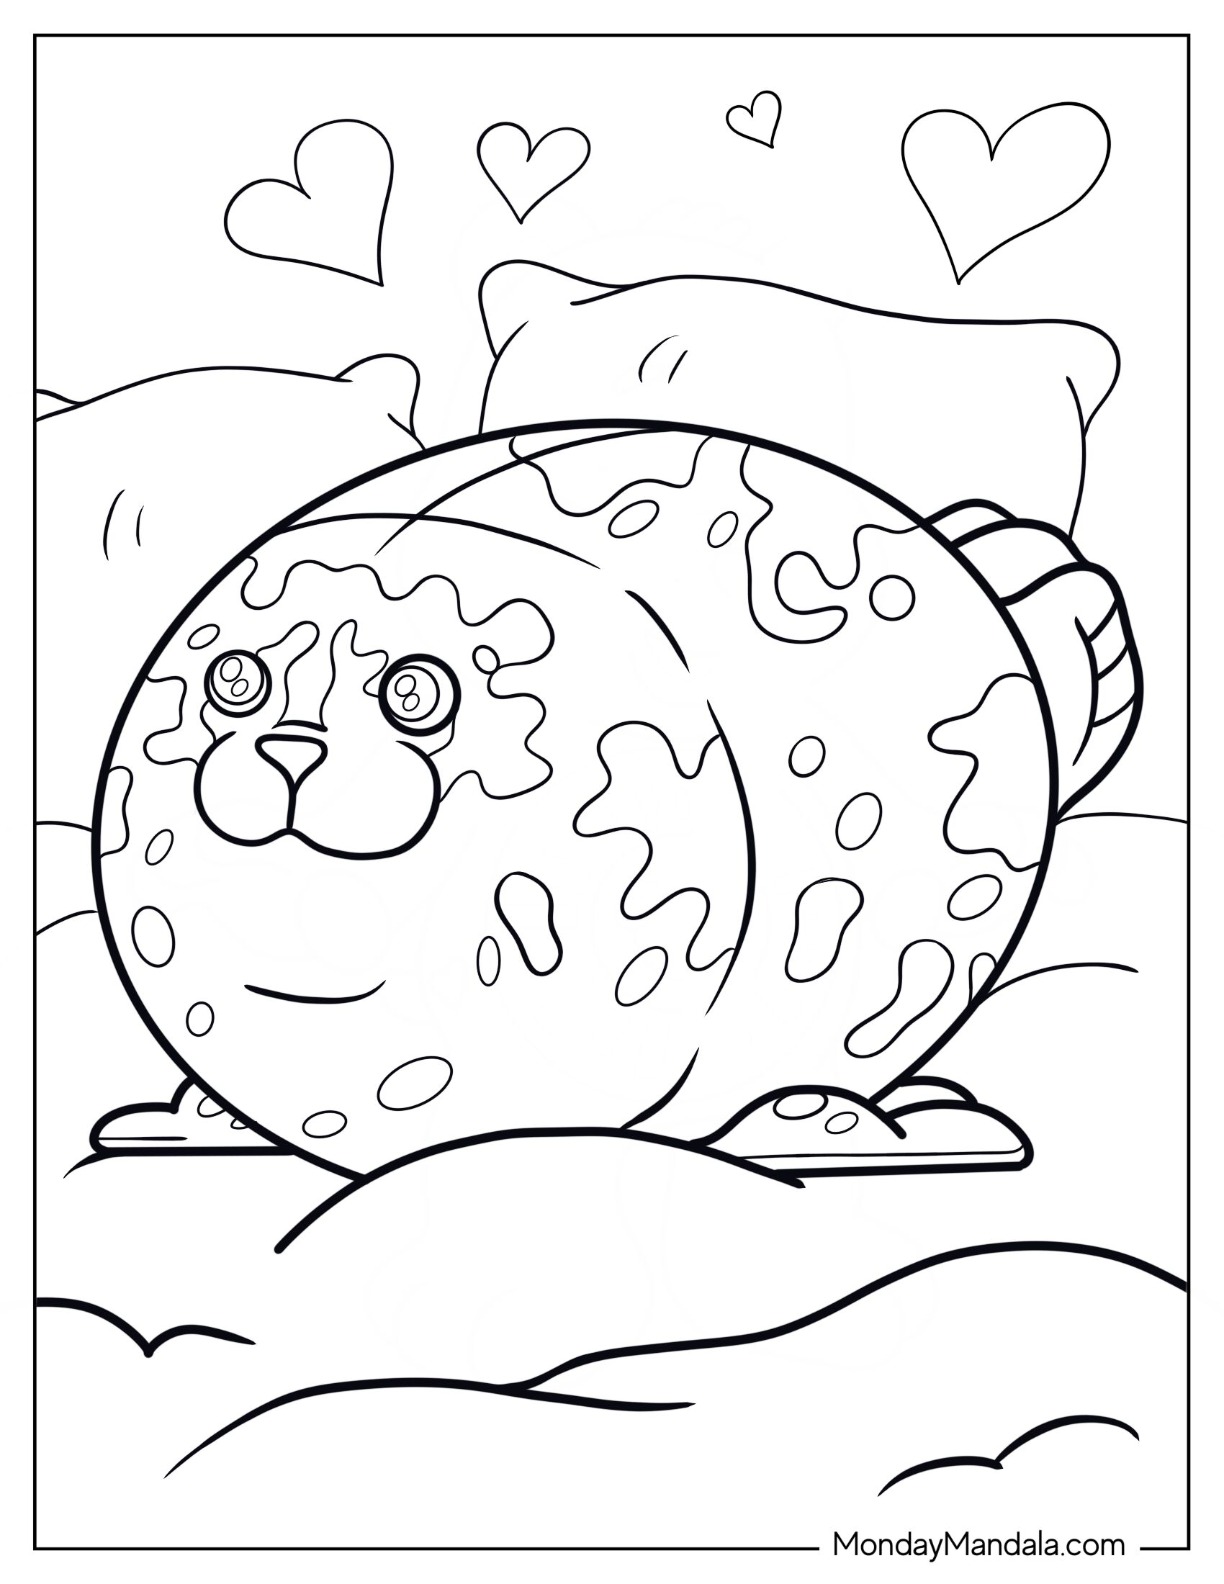 Seal coloring pages free pdf printables